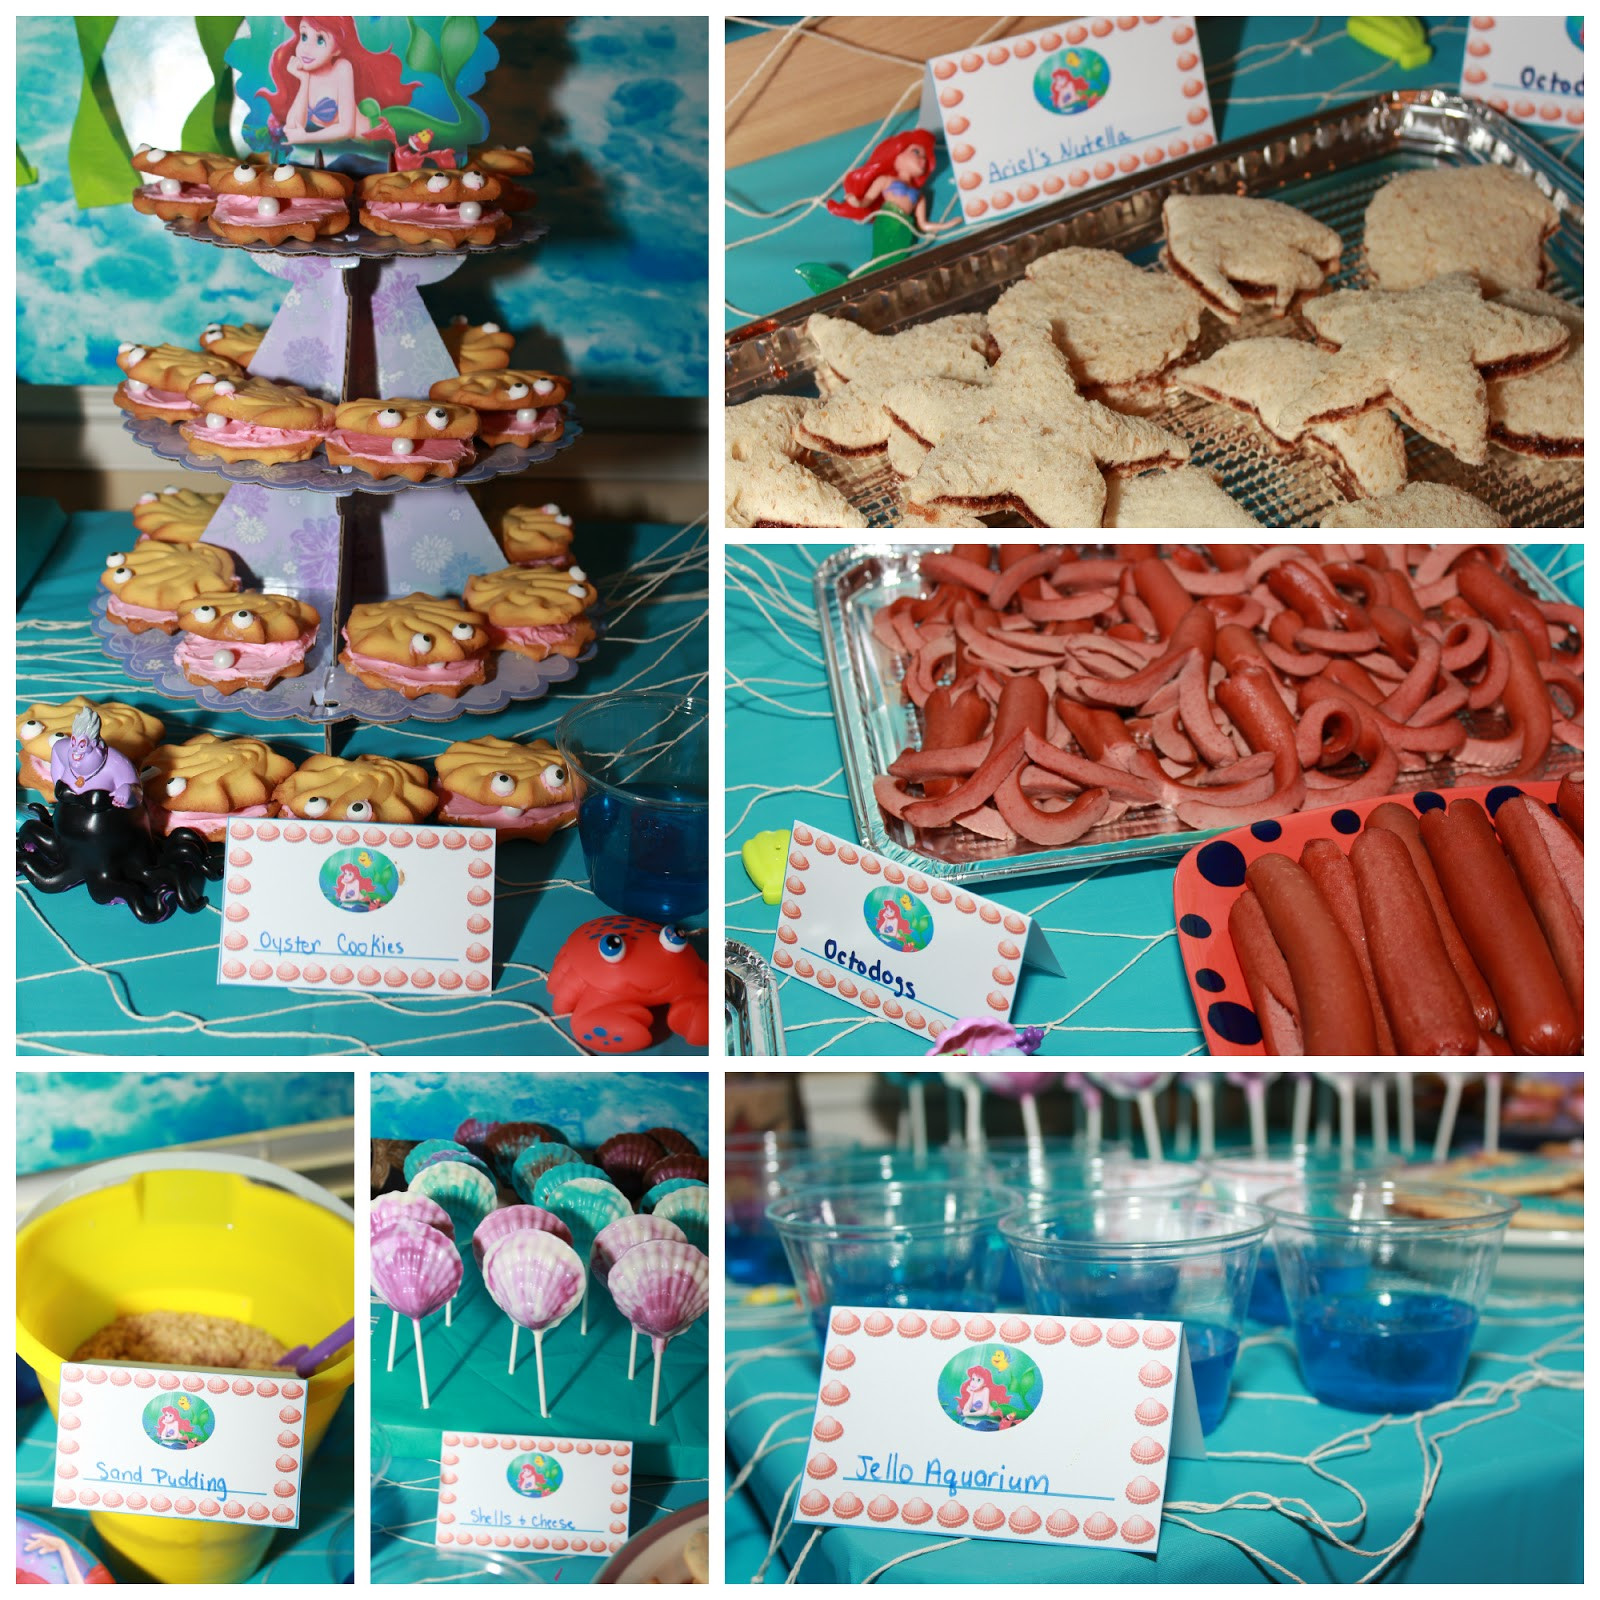 Ideas For Little Mermaid Party
 Melissa s Party Ideas The Little Mermaid Party Ideas